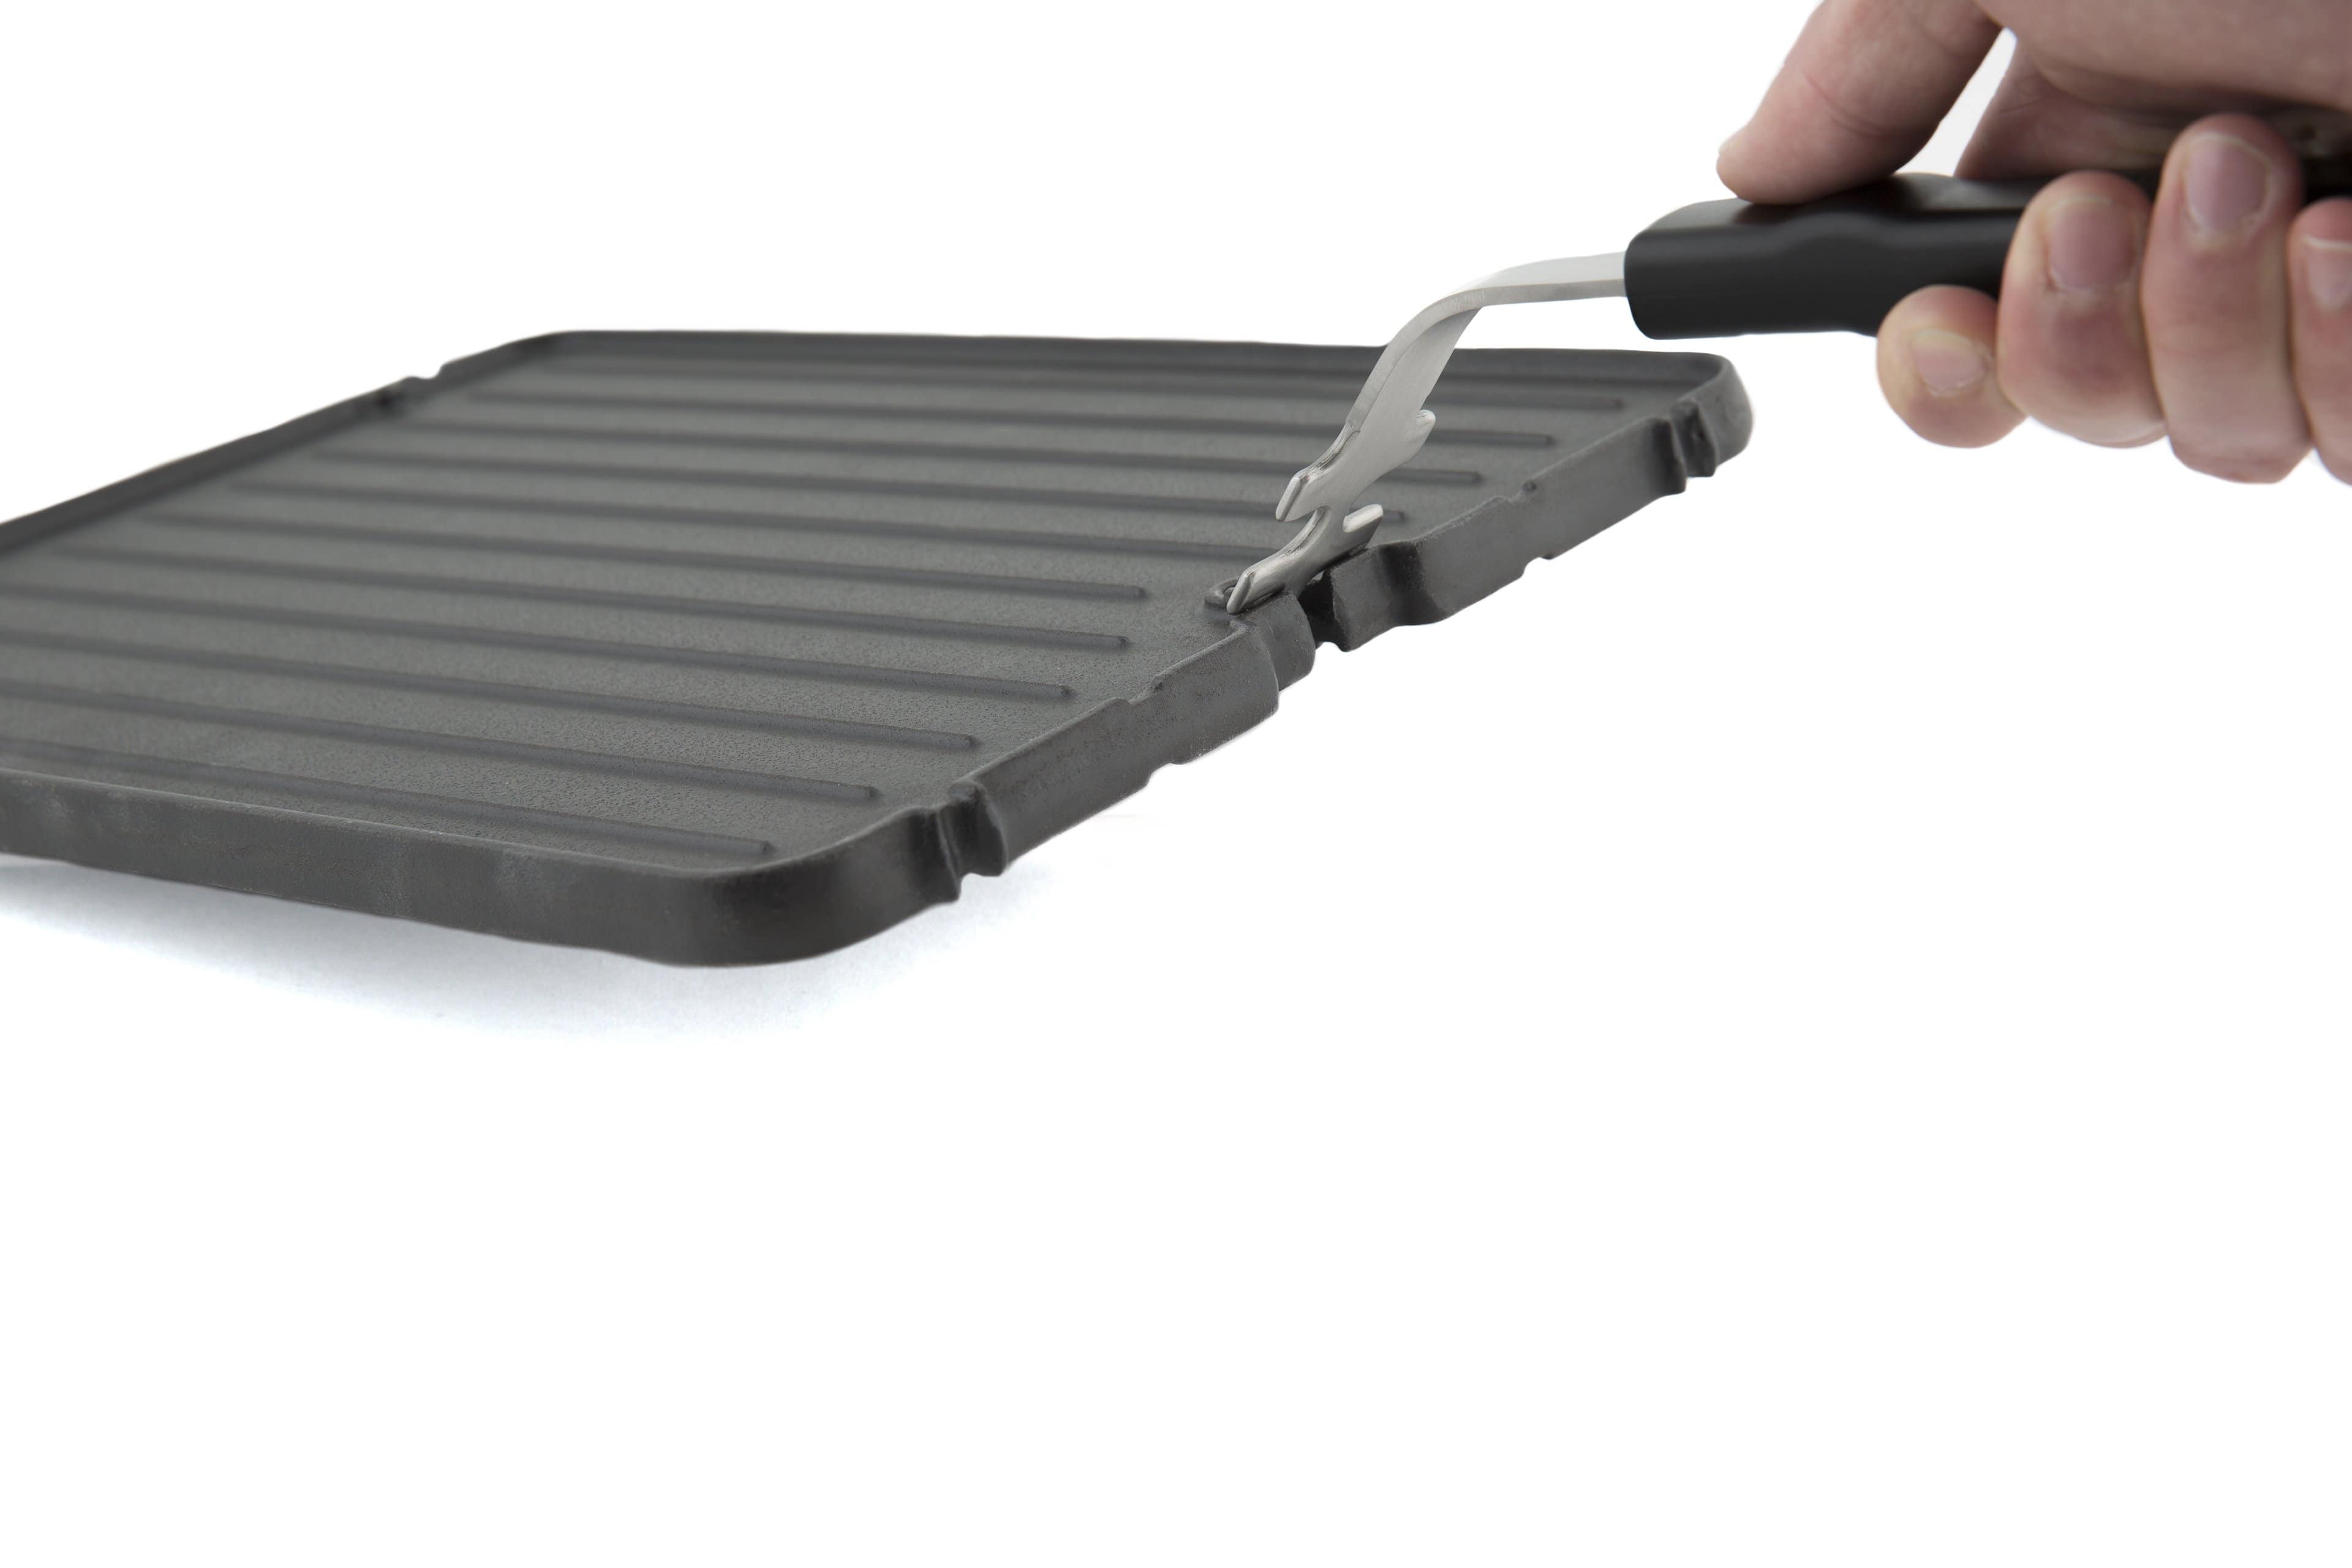 Broil King Broil King Accessories GRIDDLE - PORTA CHEF - CAST IRON